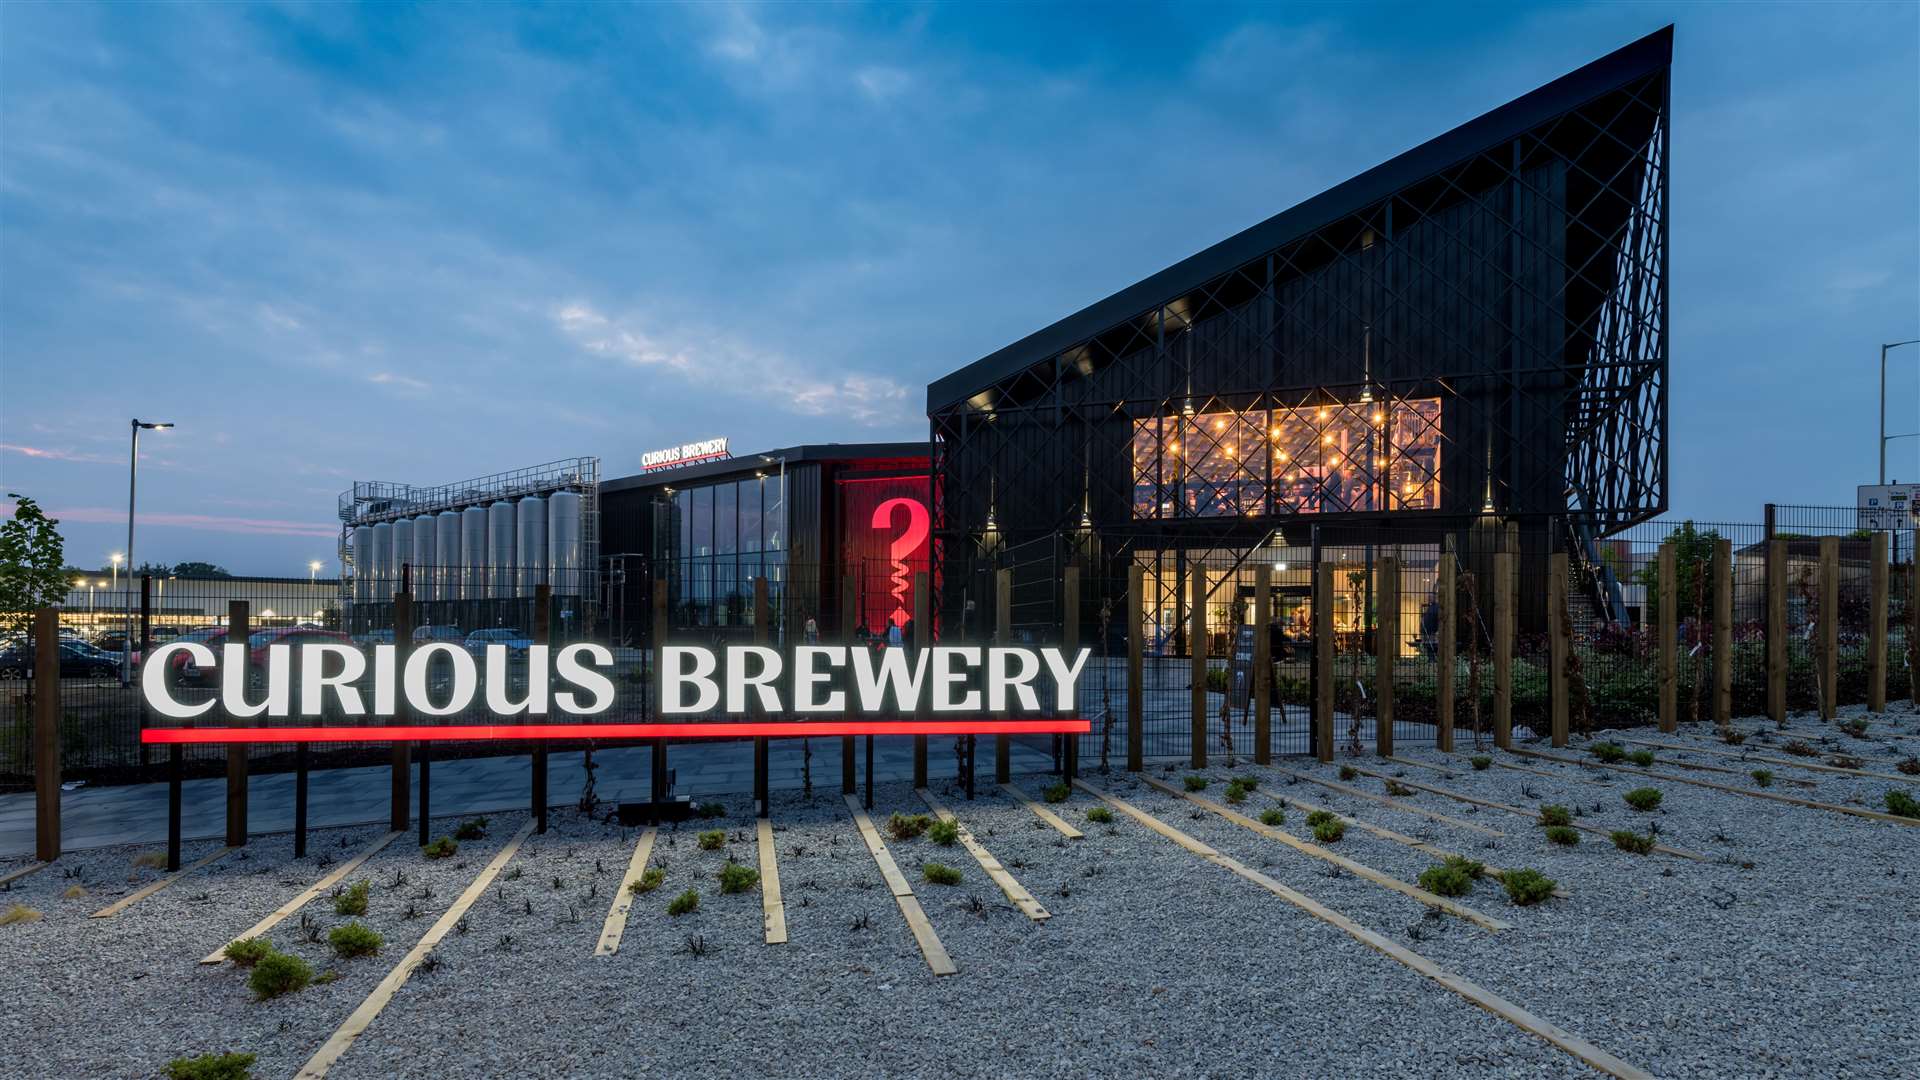 Curious Brewery in Ashford has been bought by St Peter's Brewery in Suffolk